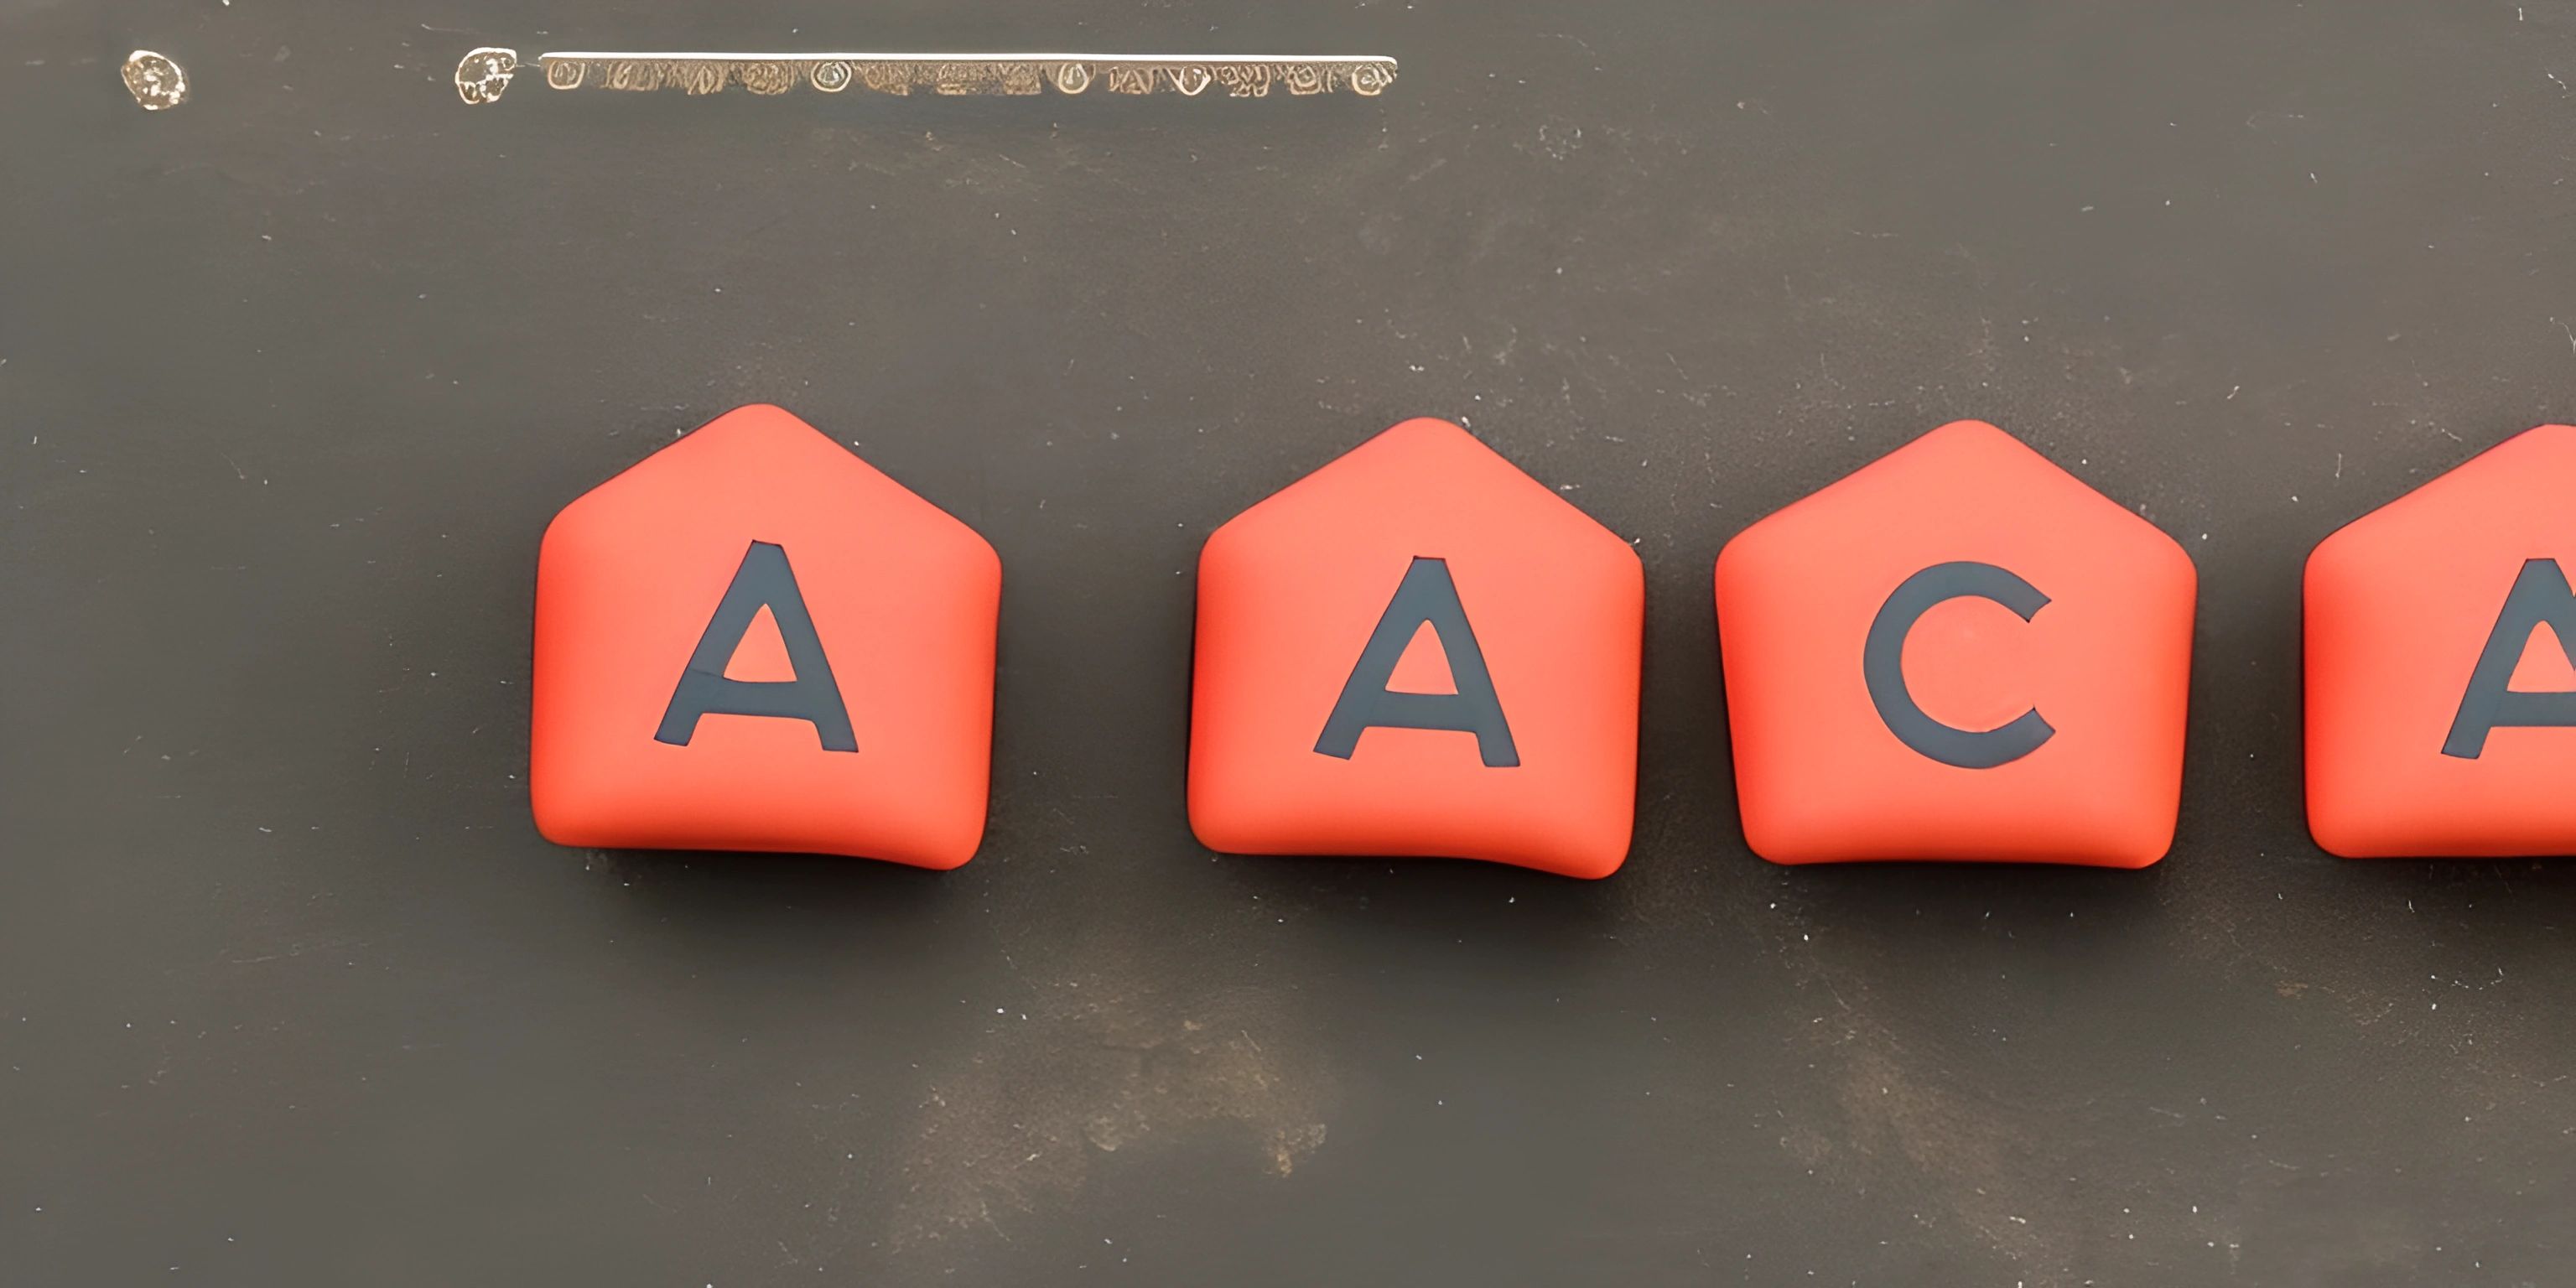 four red buoys attached to the wall above an aca sign on a black surface